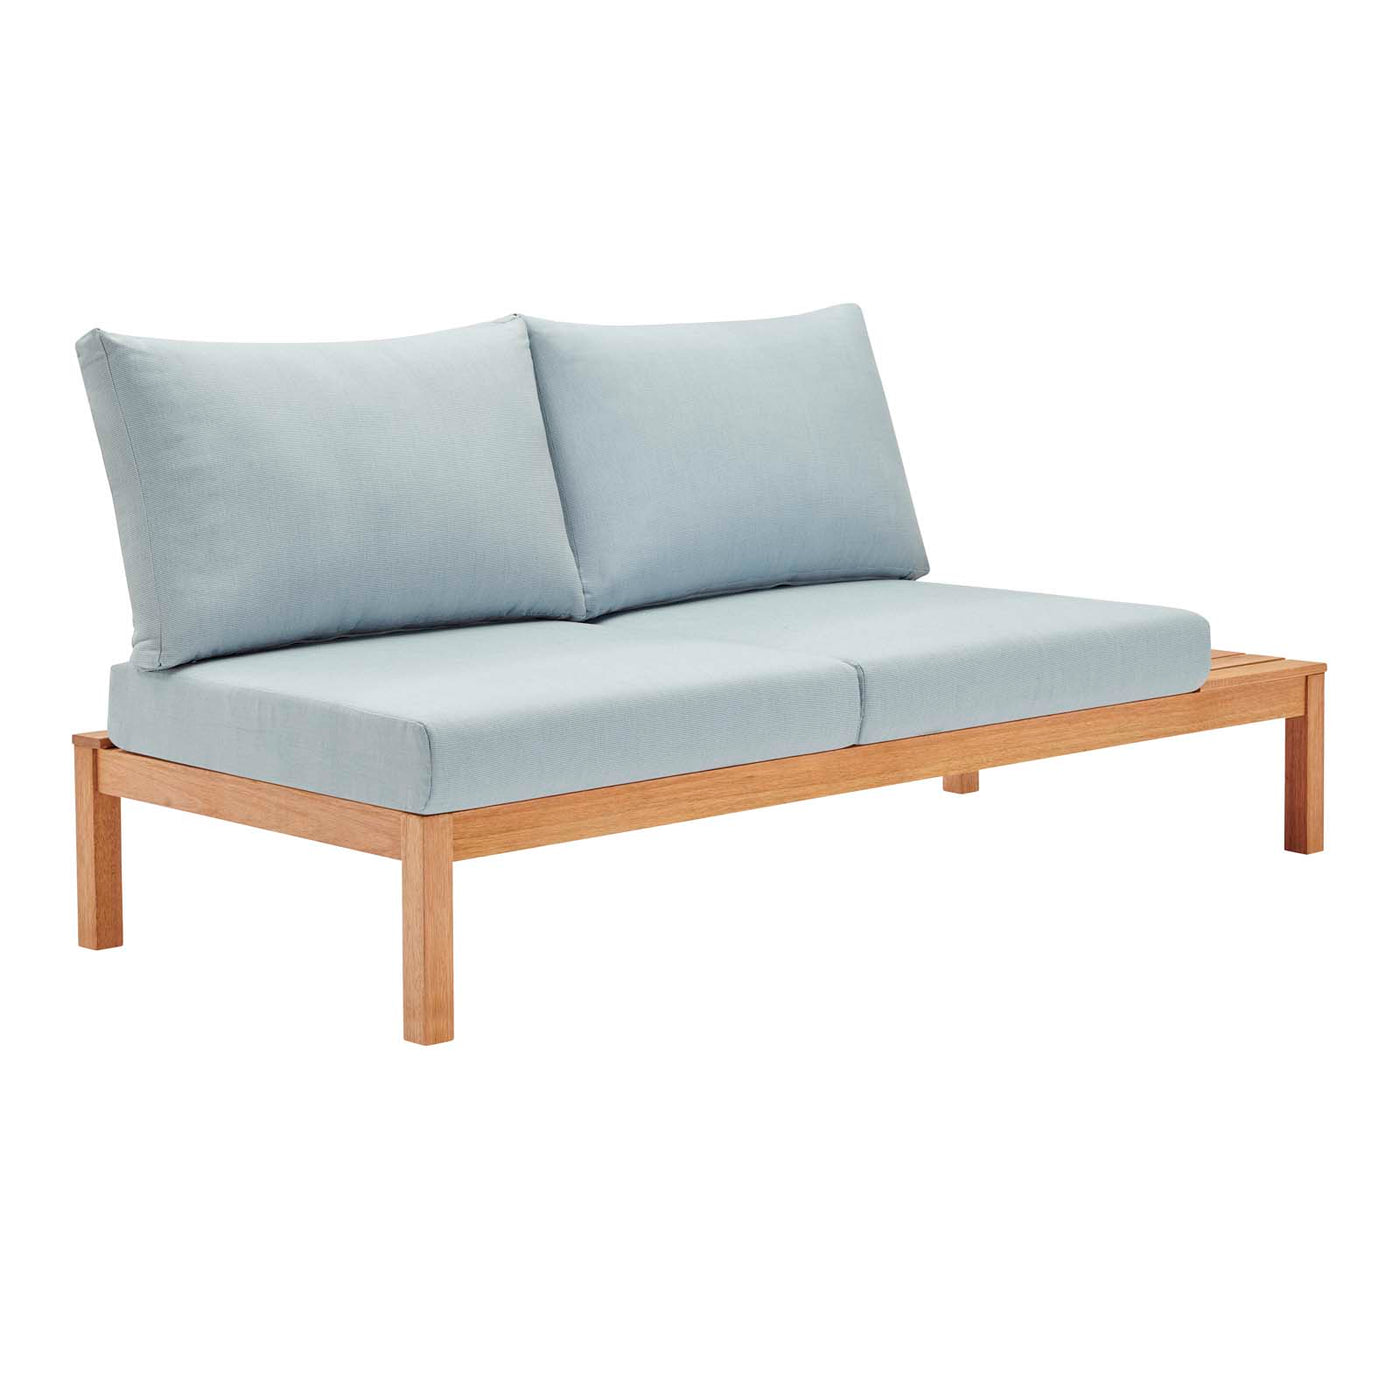 Freeport Karri Wood Outdoor Patio Loveseat with Right-Facing Side End Table